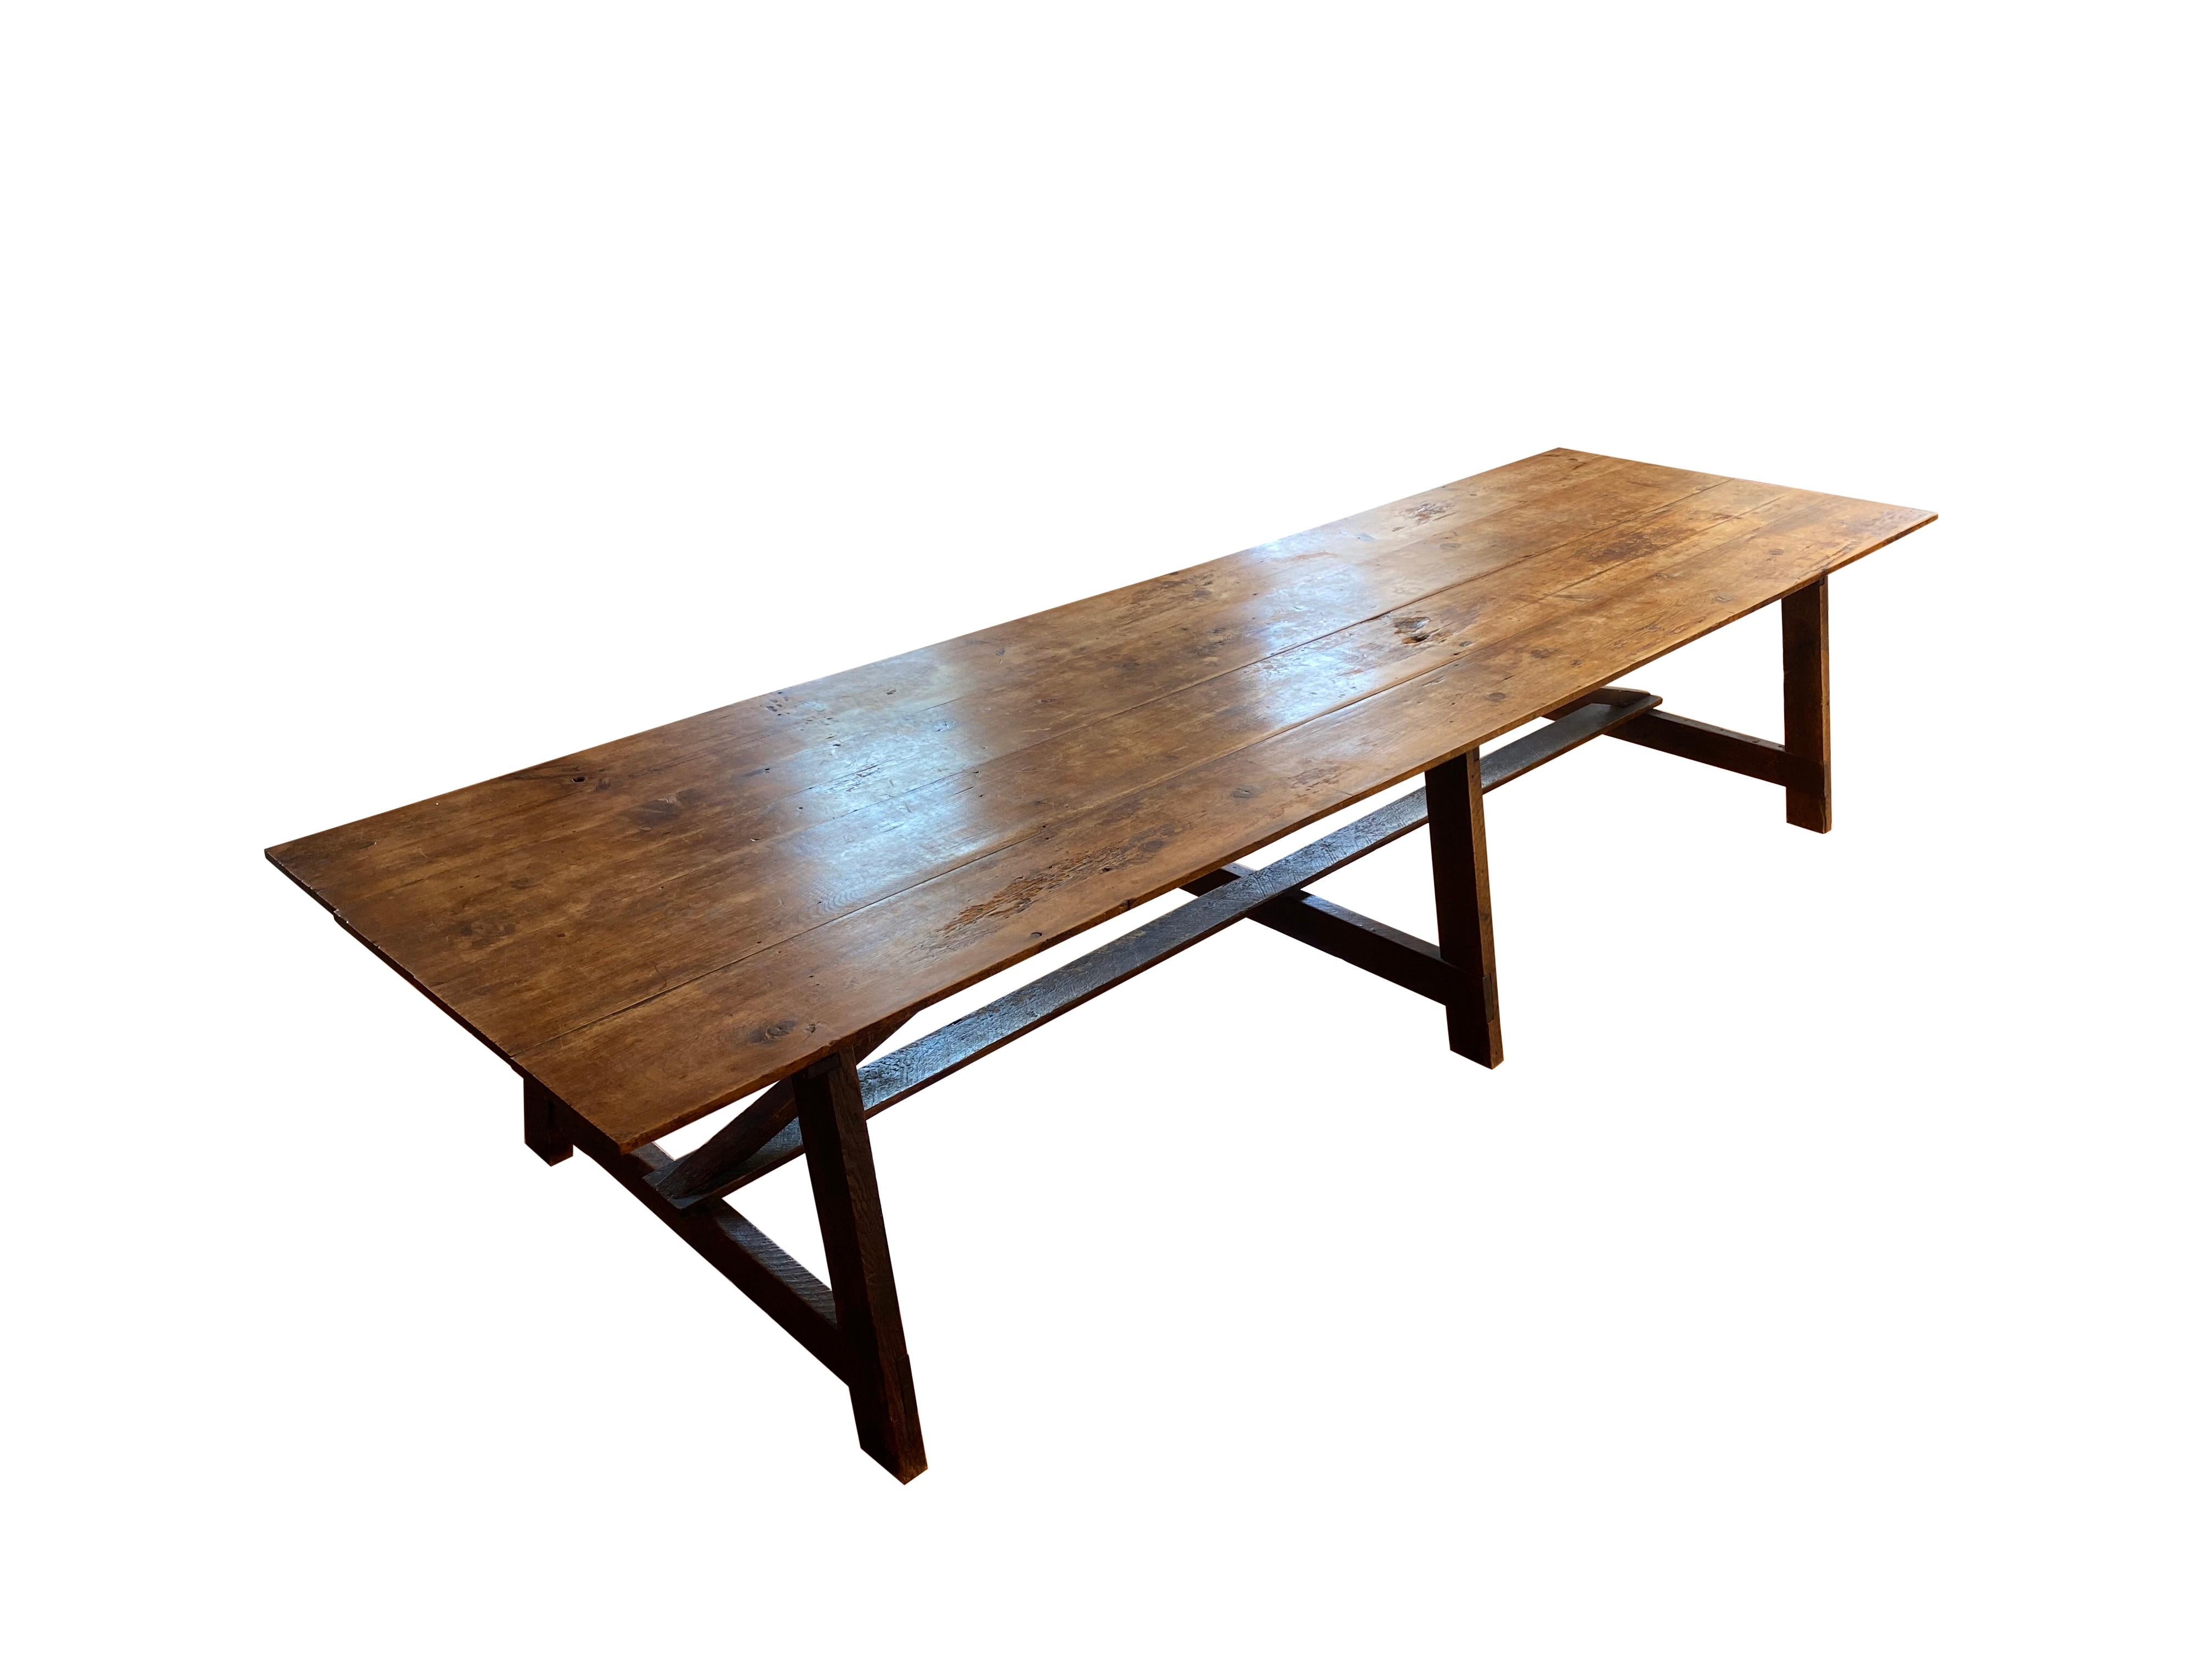 Farmhouse table made out of 19th century reclaimed barnwood from Oregon. The table was modeled off antique French farmhouse tables made of fruitwood and has the same feeling and appearance of an antique piece. Years of wear and use have created a